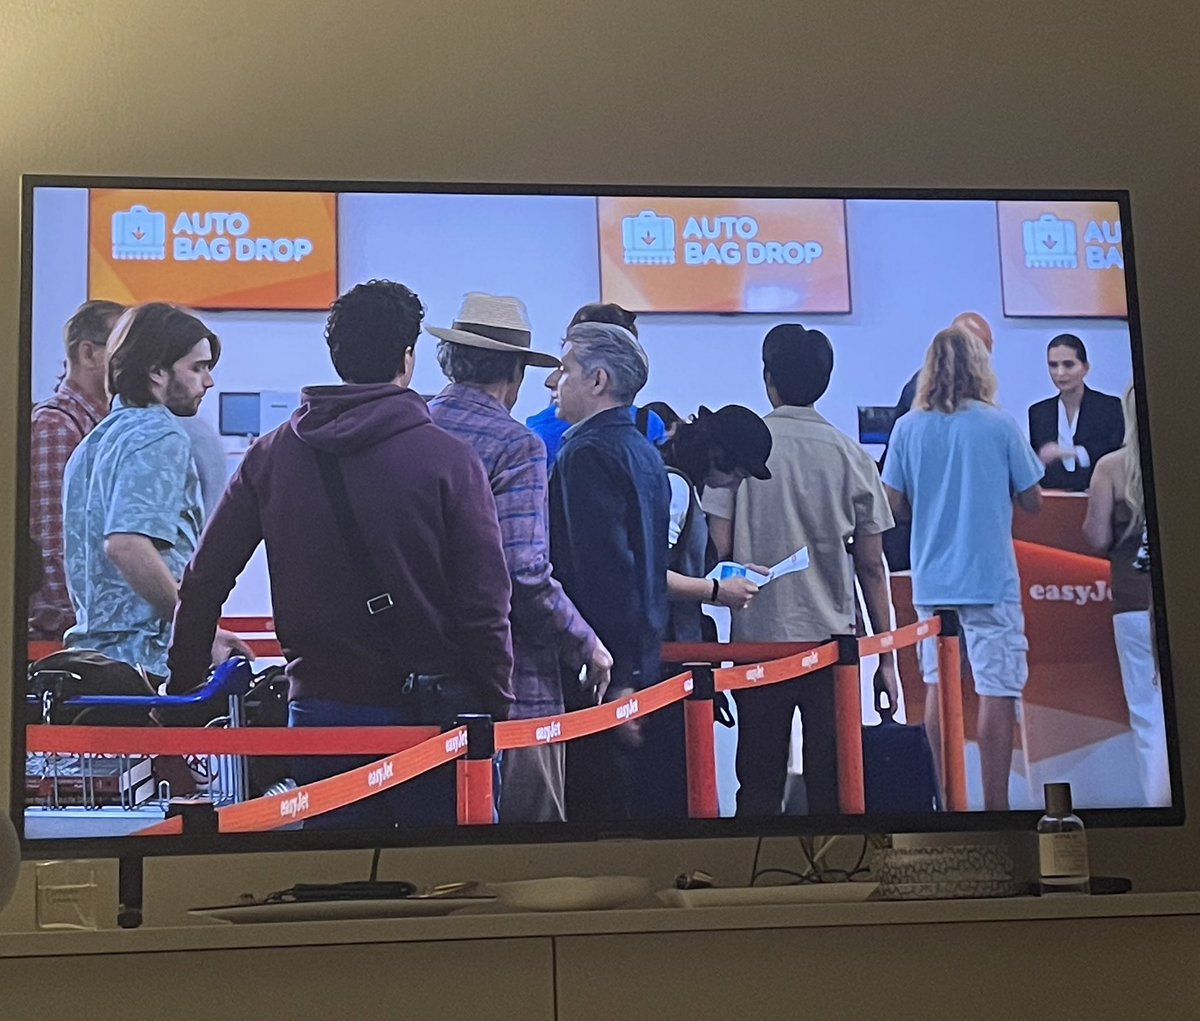 The biggest #WhiteLotus finale plot hole is that $50k was a drop in the bucket but they’re flying @easyJet